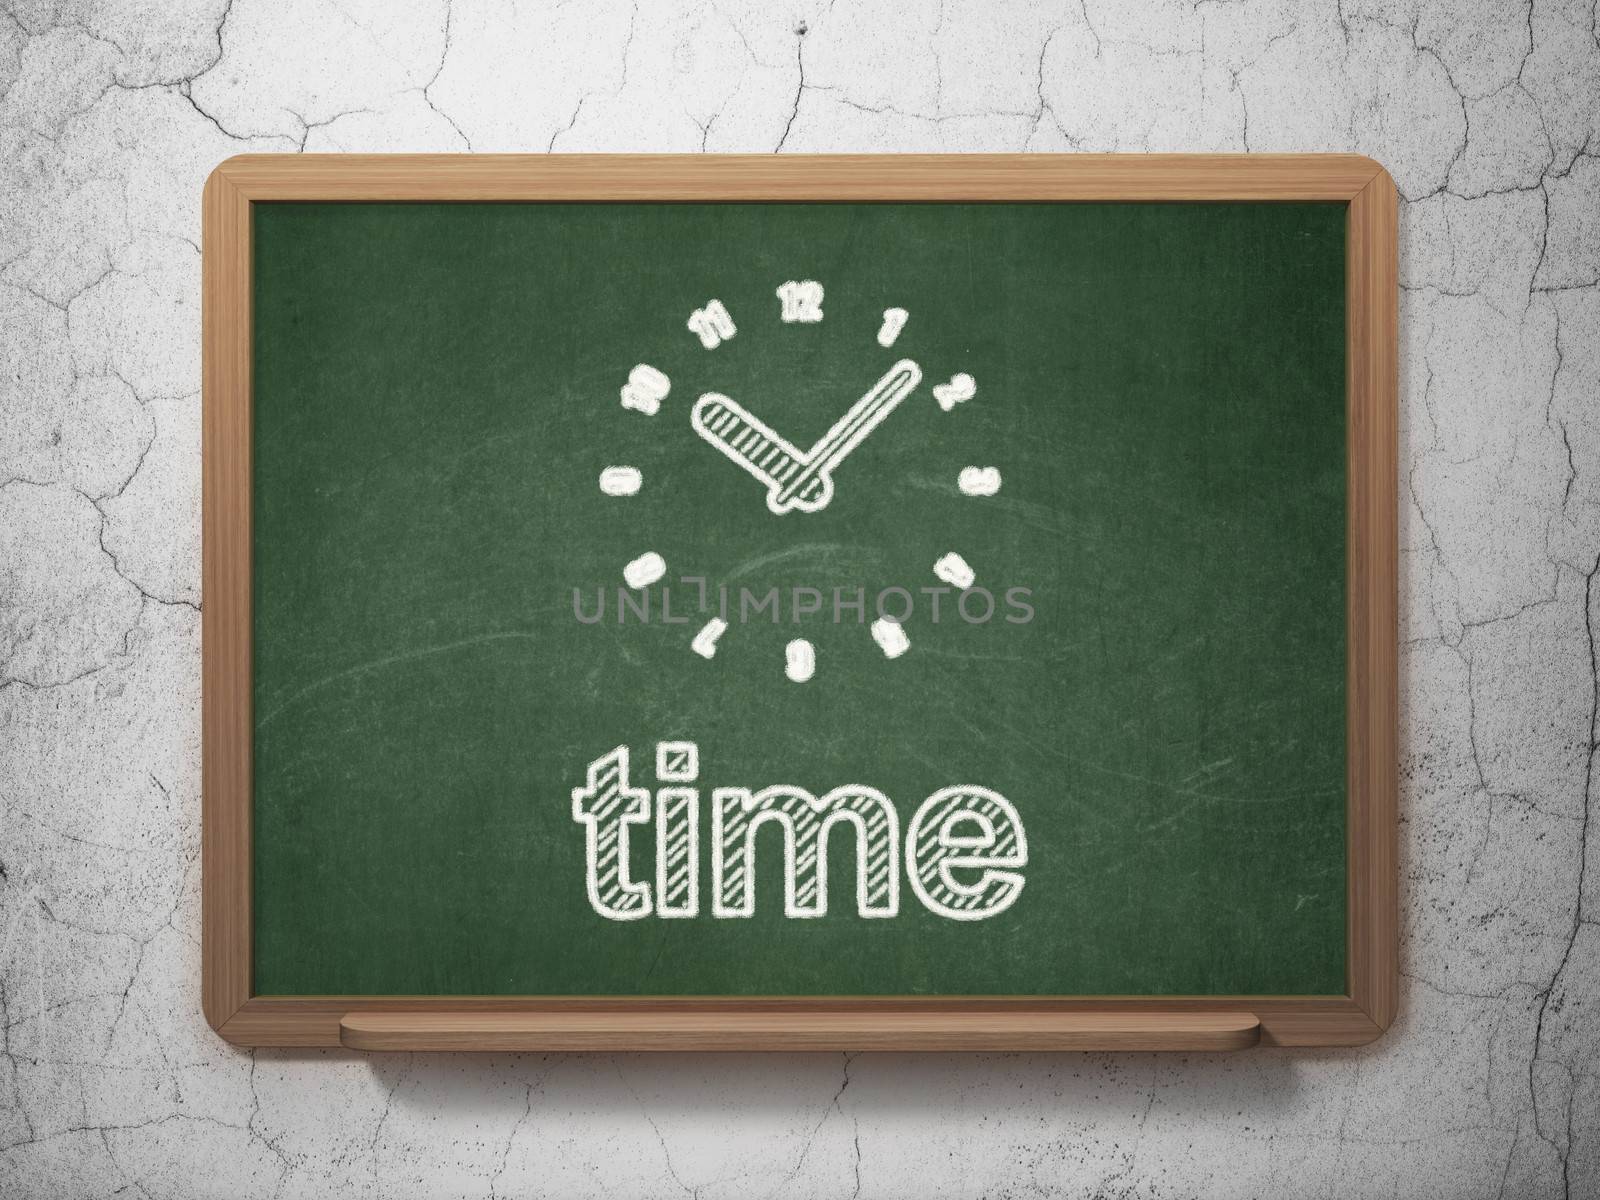 Timeline concept: Clock icon and text Time on Green chalkboard on grunge wall background, 3d render